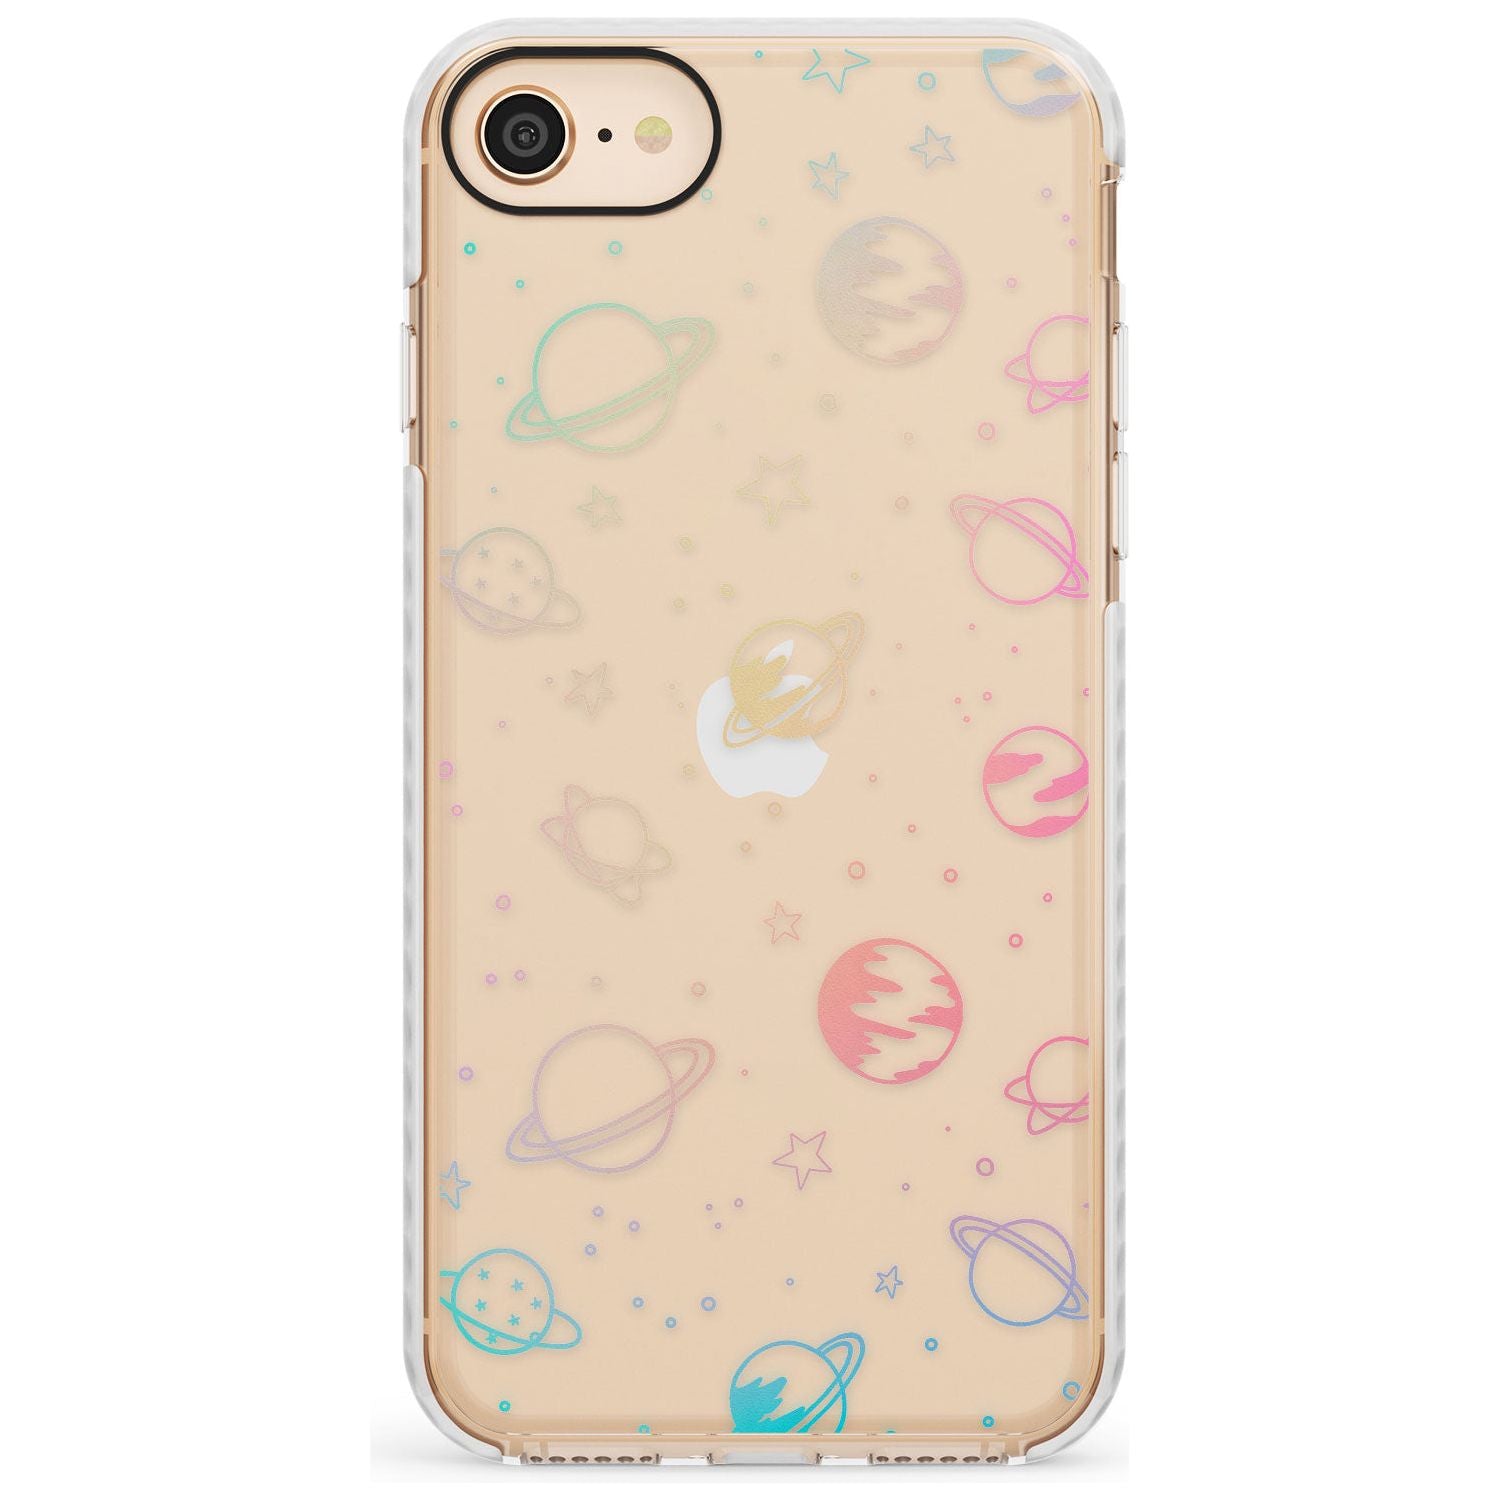 Outer Space Outlines: Pastels on Clear Slim TPU Phone Case for iPhone SE 8 7 Plus